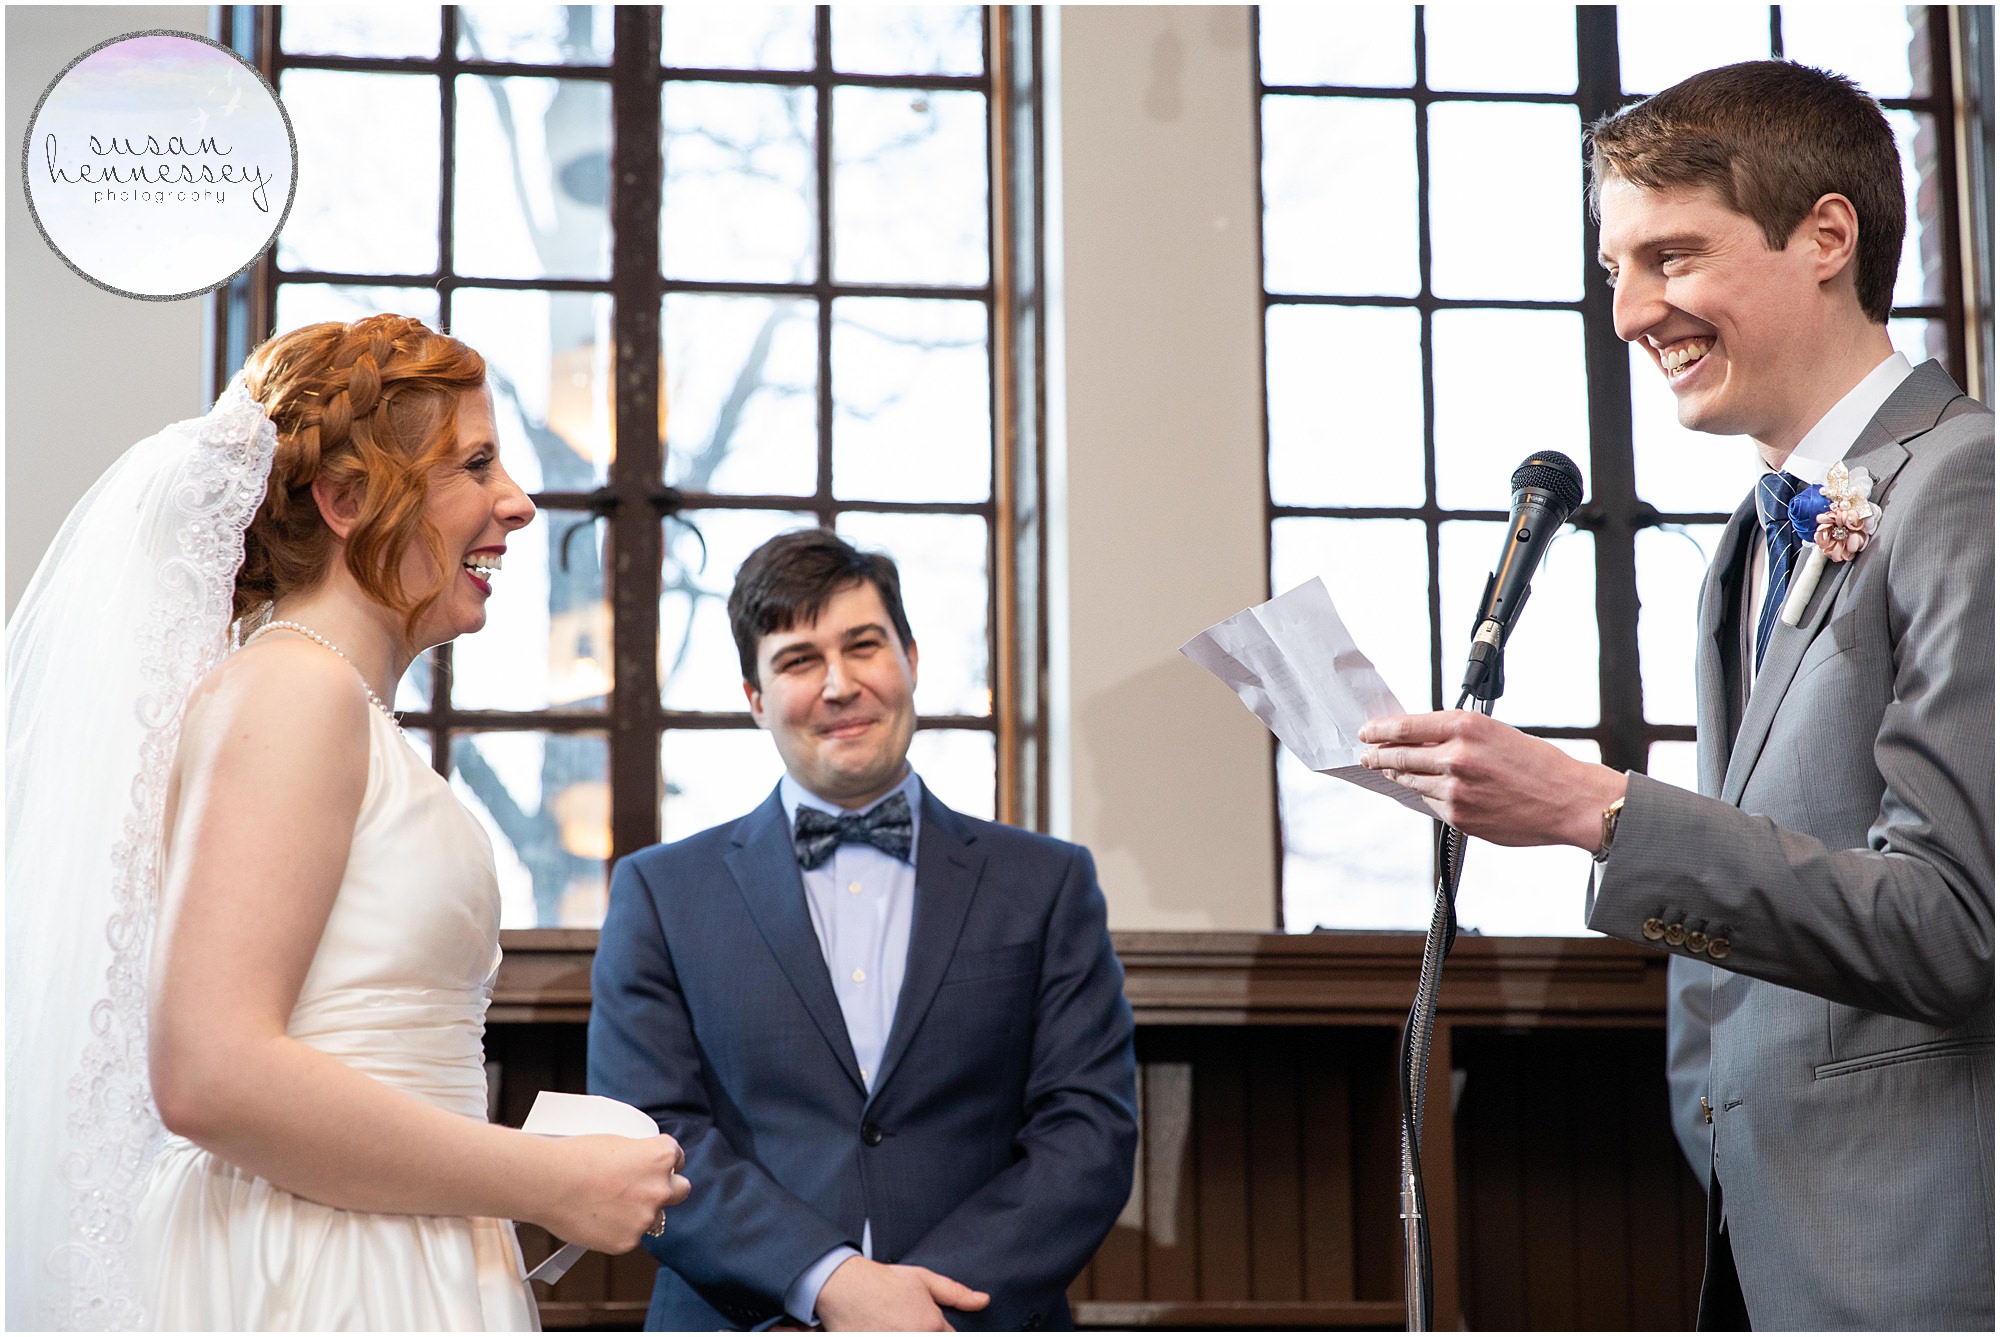 Groom reads his vows at indoor winter ceremony